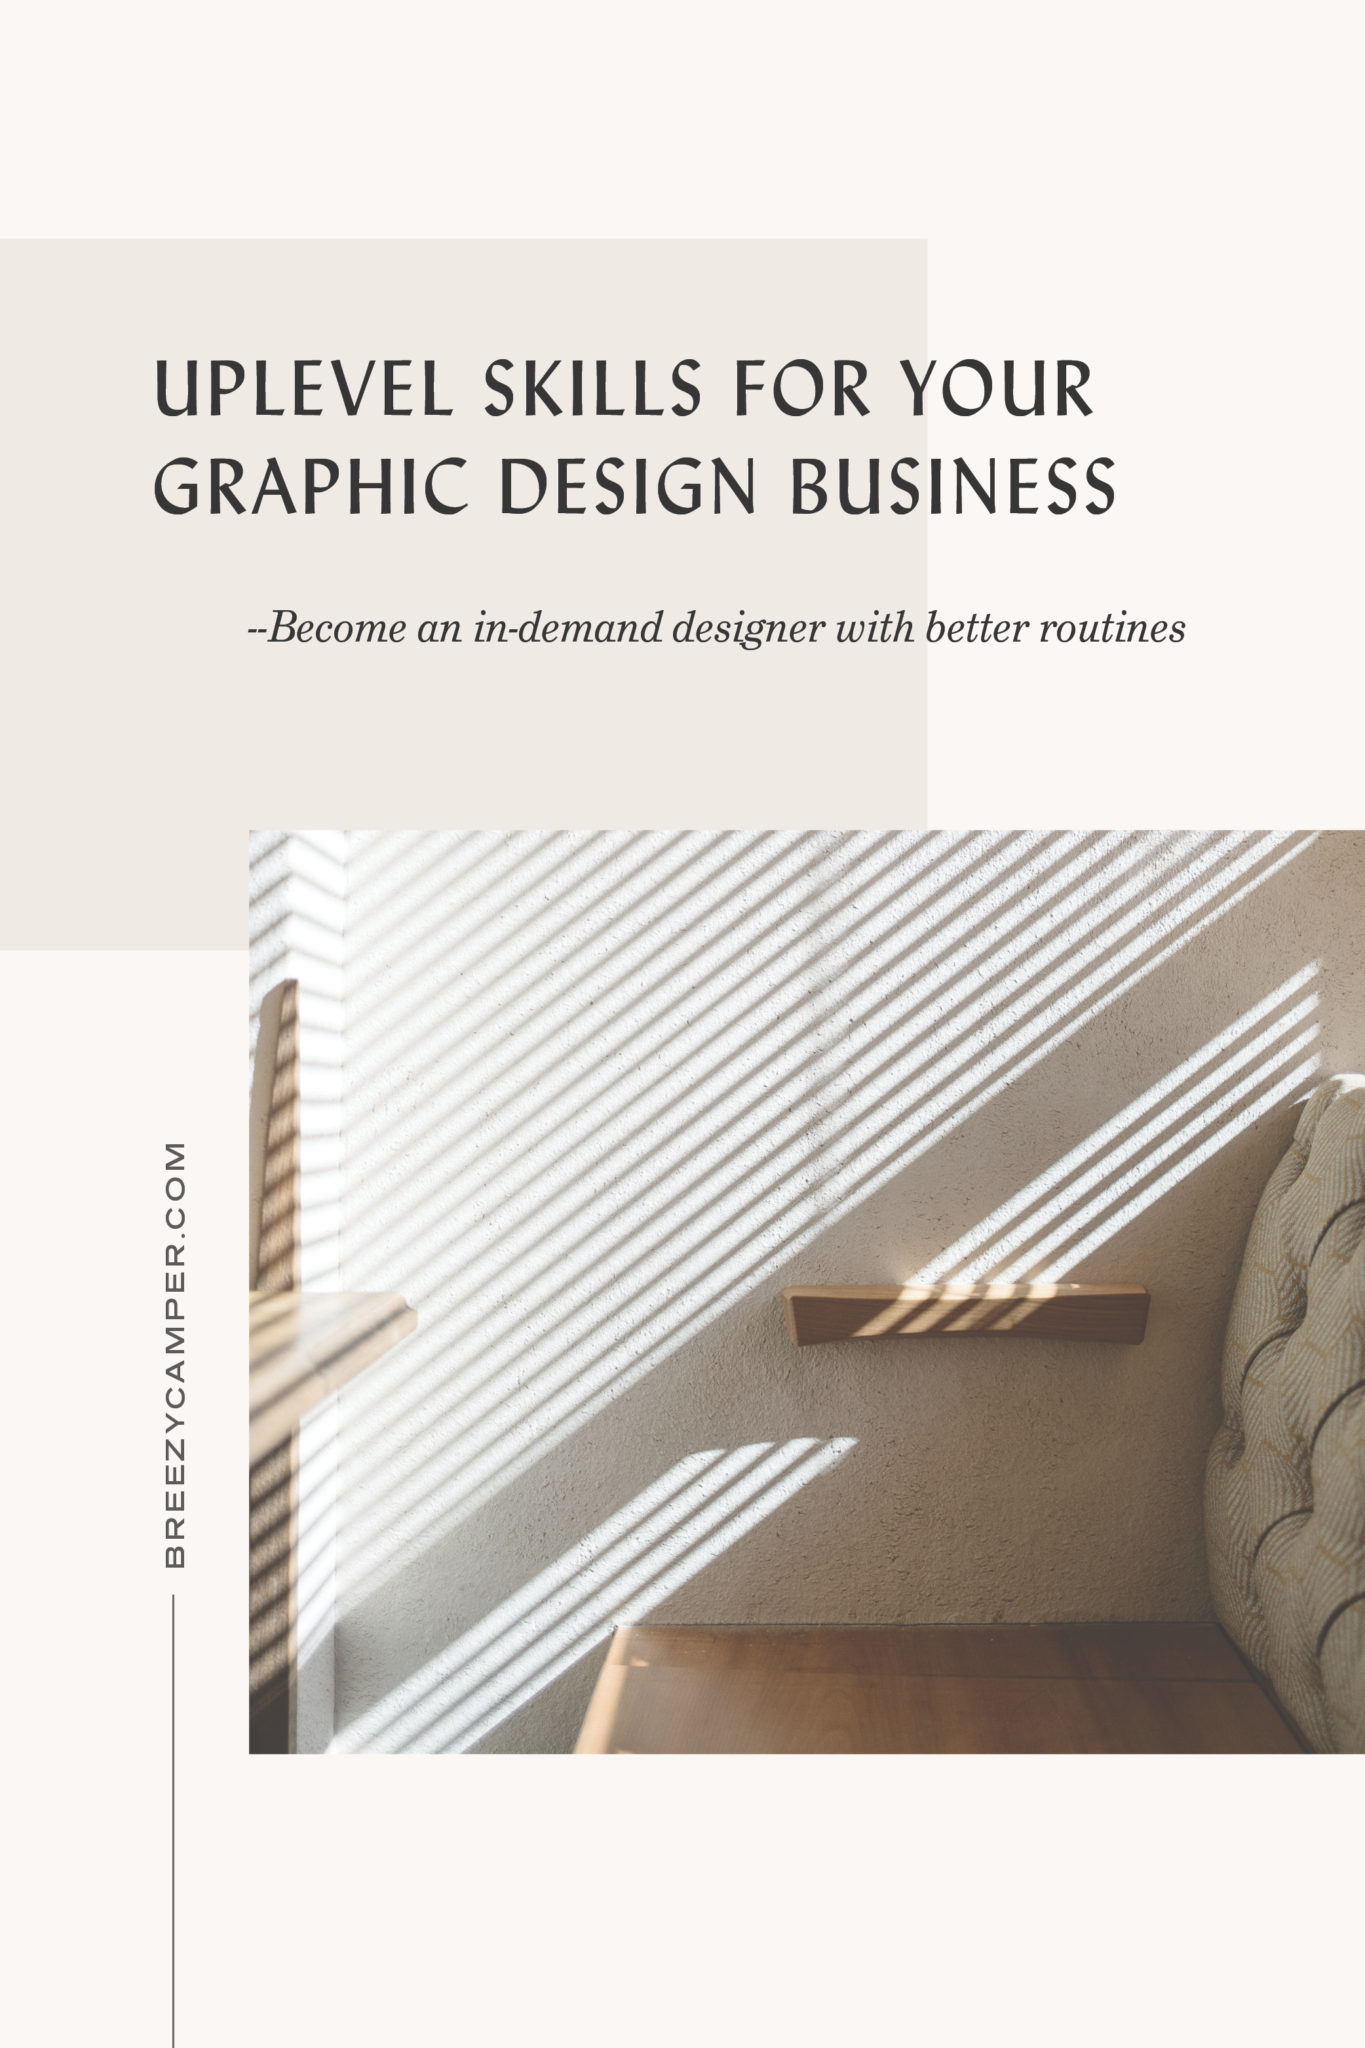 Graphic with the text "Uplevel skills for your graphic design business"